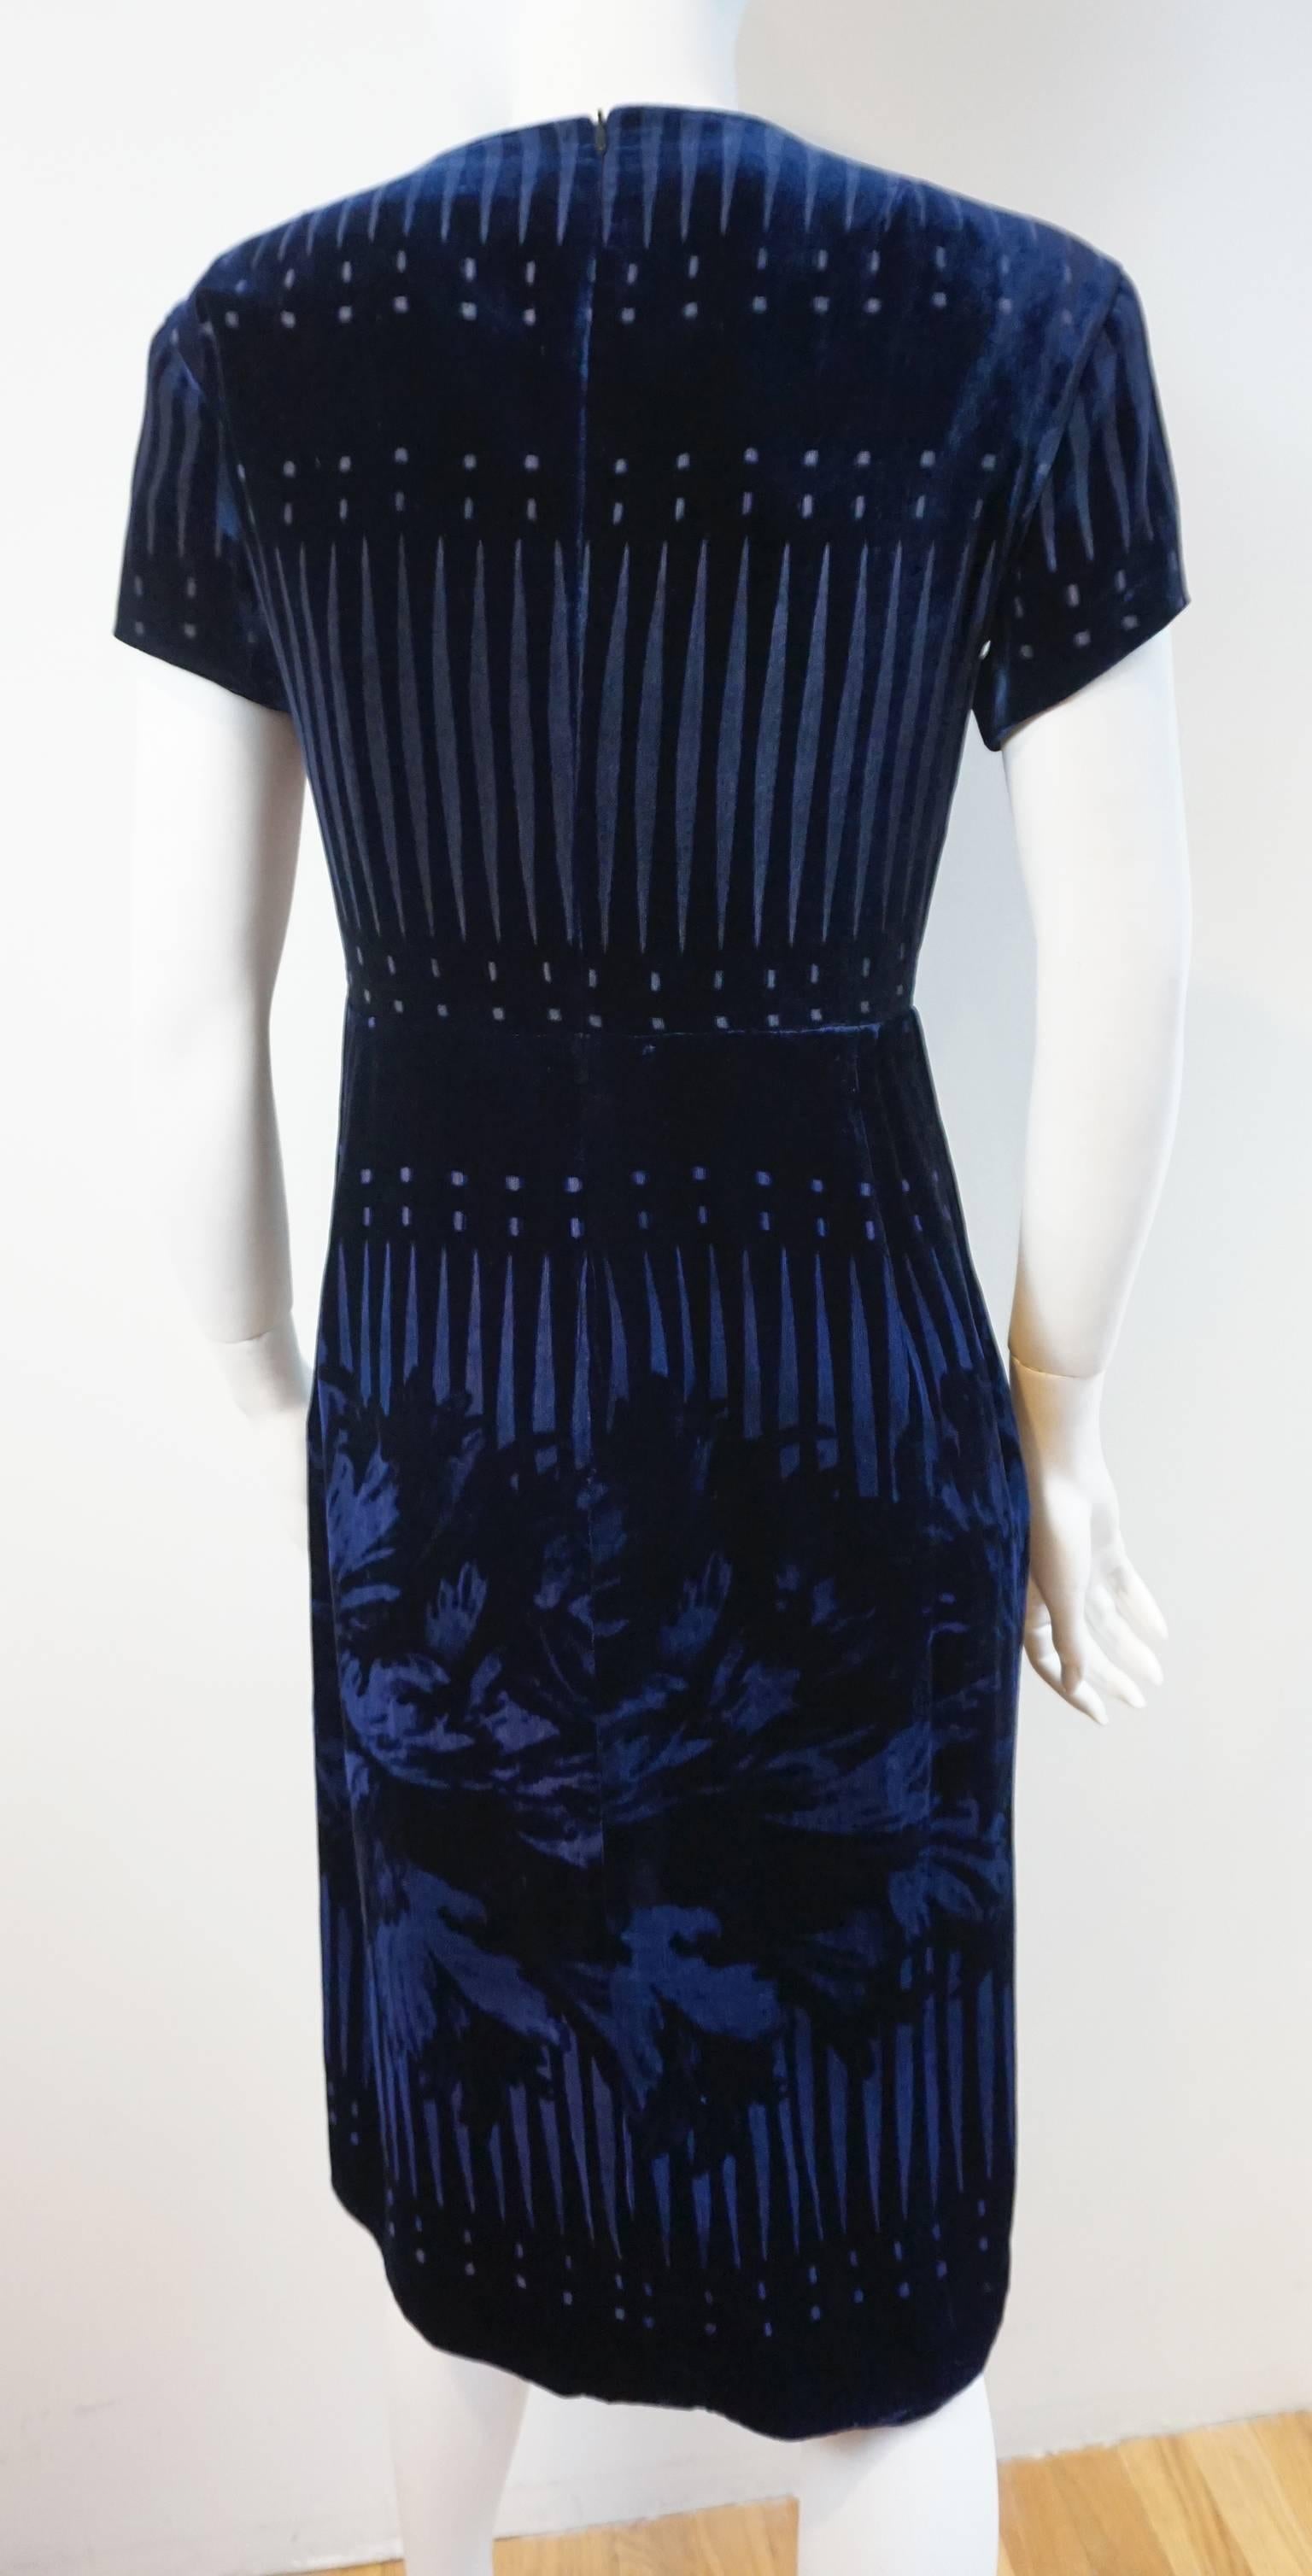 PETER PILOTTO Velvet Corset Dress with Strap Details In Excellent Condition For Sale In New York, NY